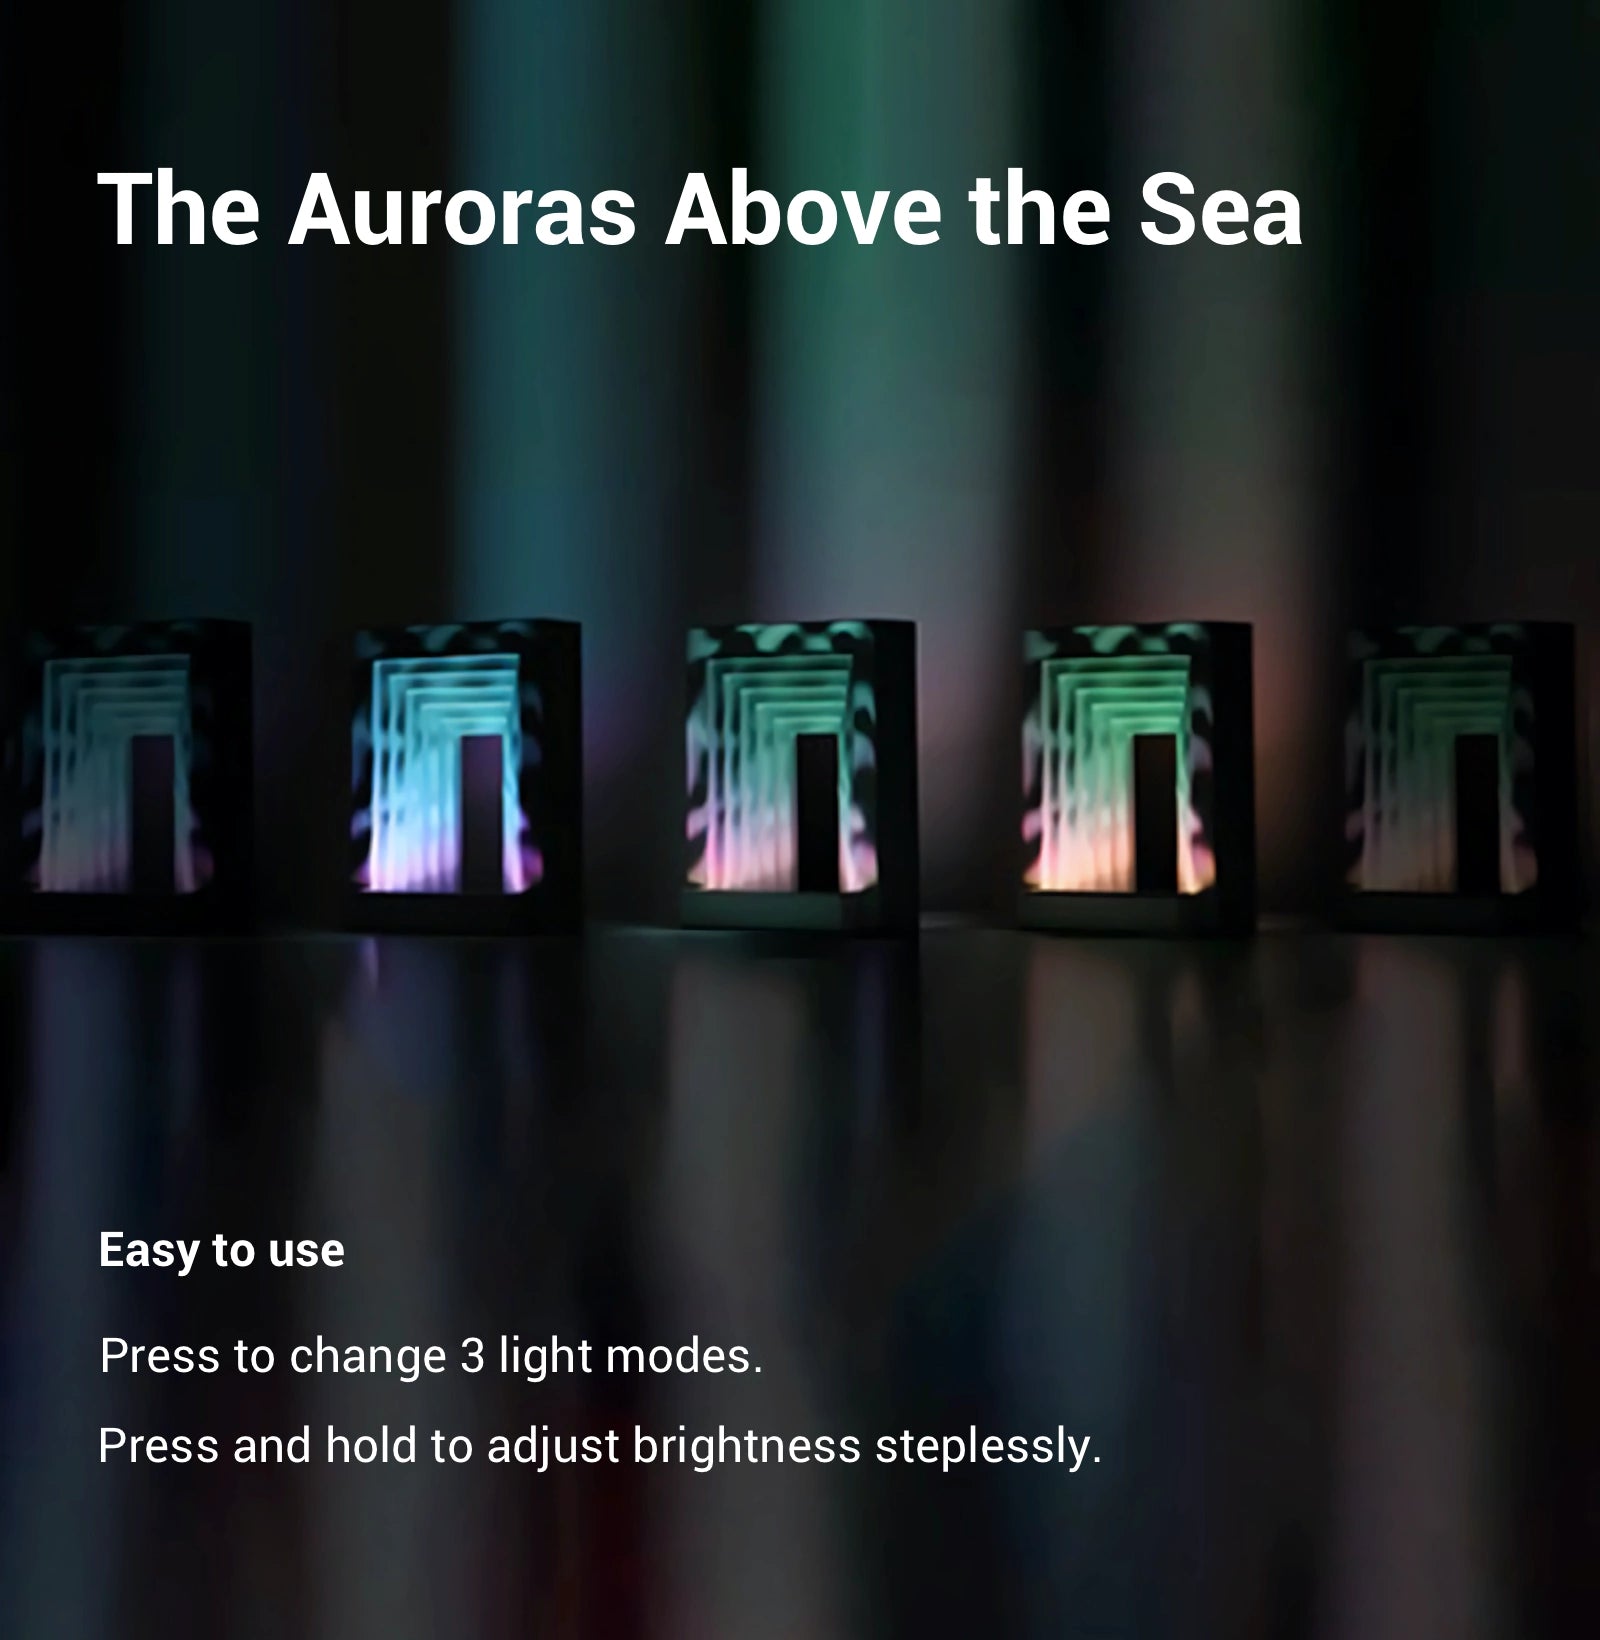 The Auroras Above the Sea Press to change 3 light modes. Press and hold to adjust brightness steplessly.